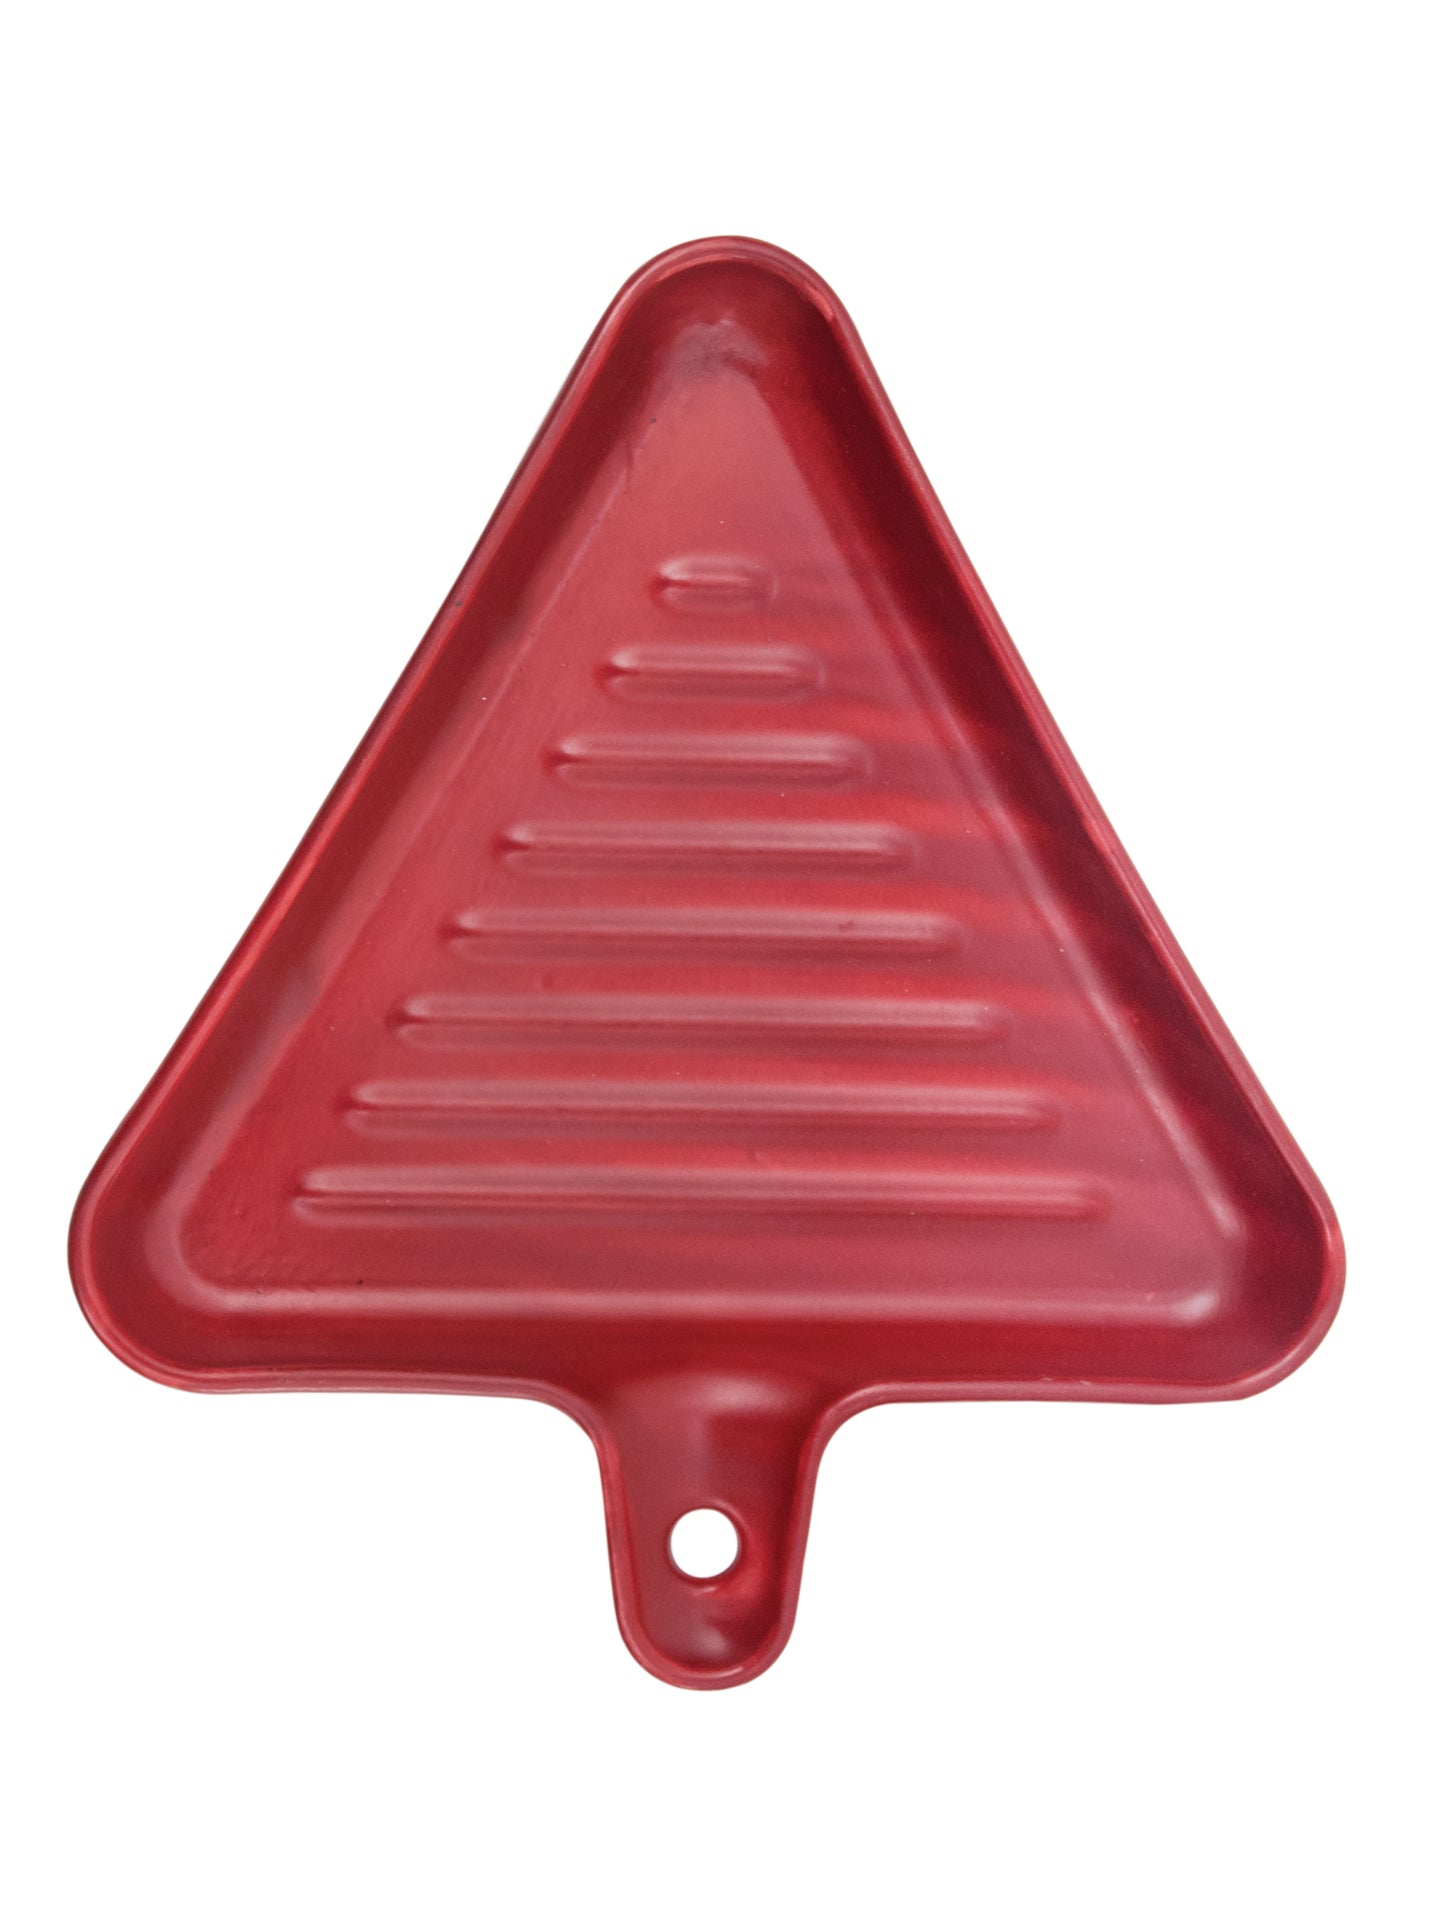 Ceramic Triangle Grill Plates for Serving, Red